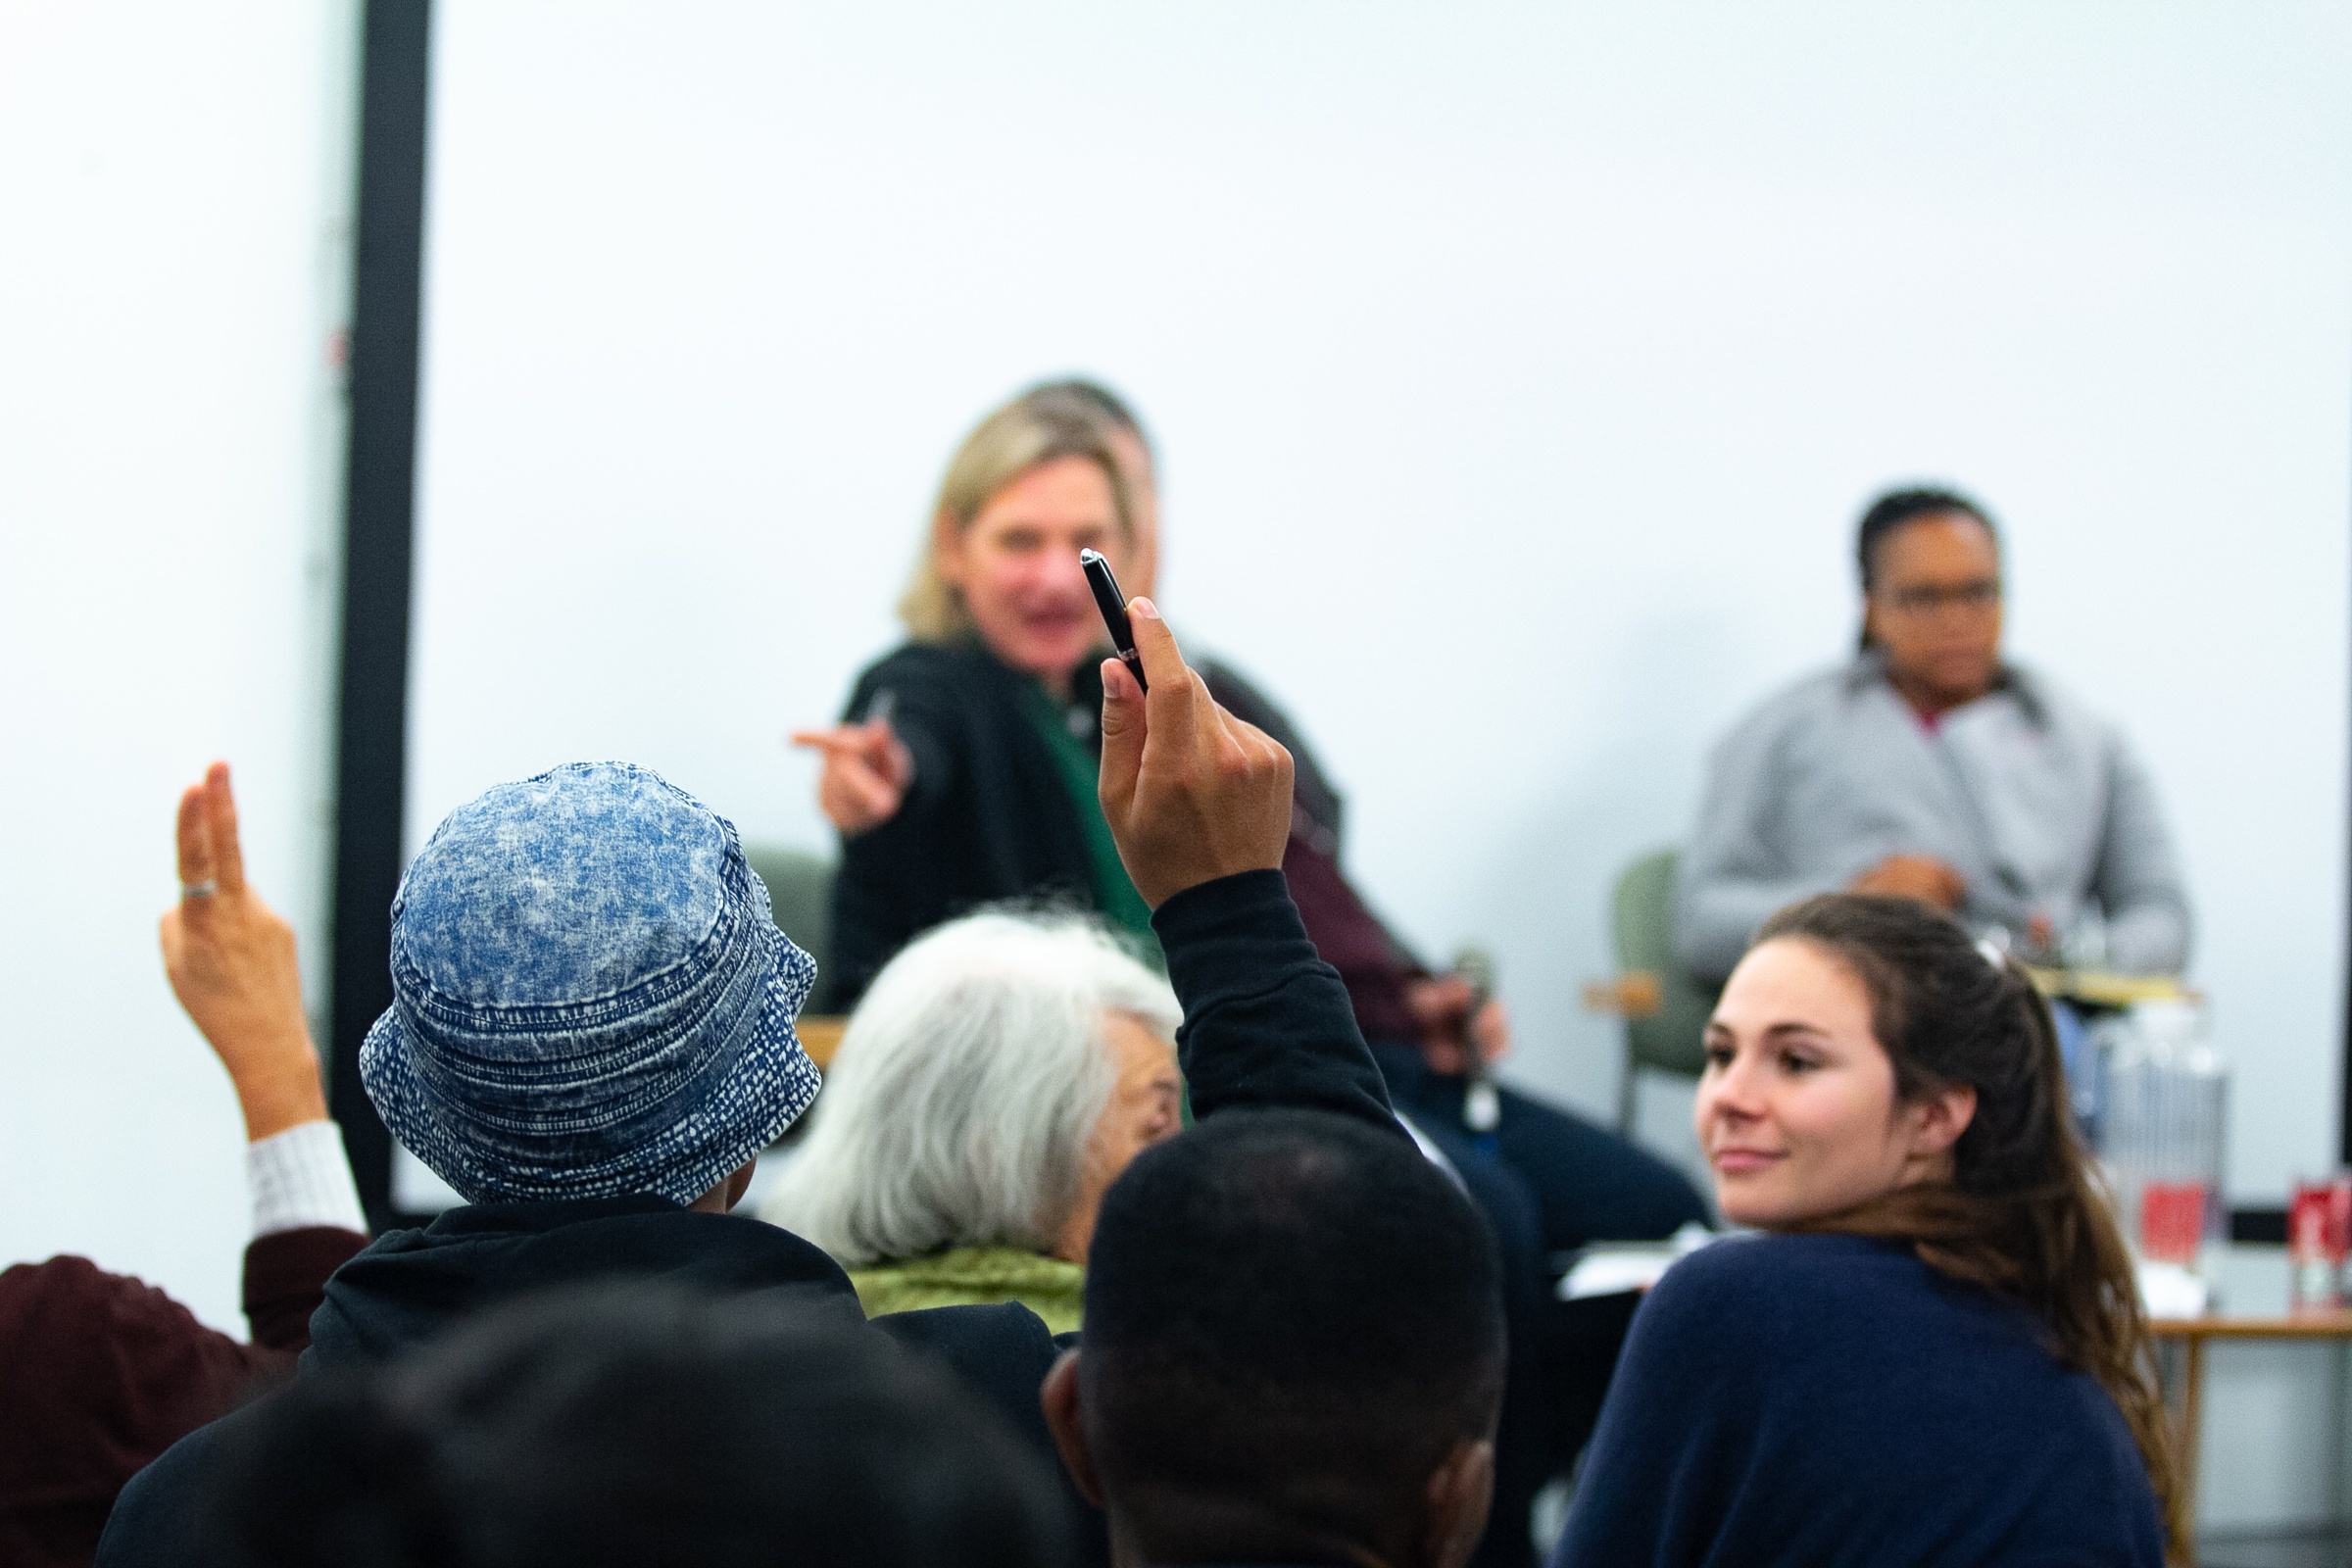 Event photograph from the 2018 rendition of the Open Book festival on A4’s ground floor. At the front, attendees with raised hands. At the back, panelists pointing at attendees for feedback.
